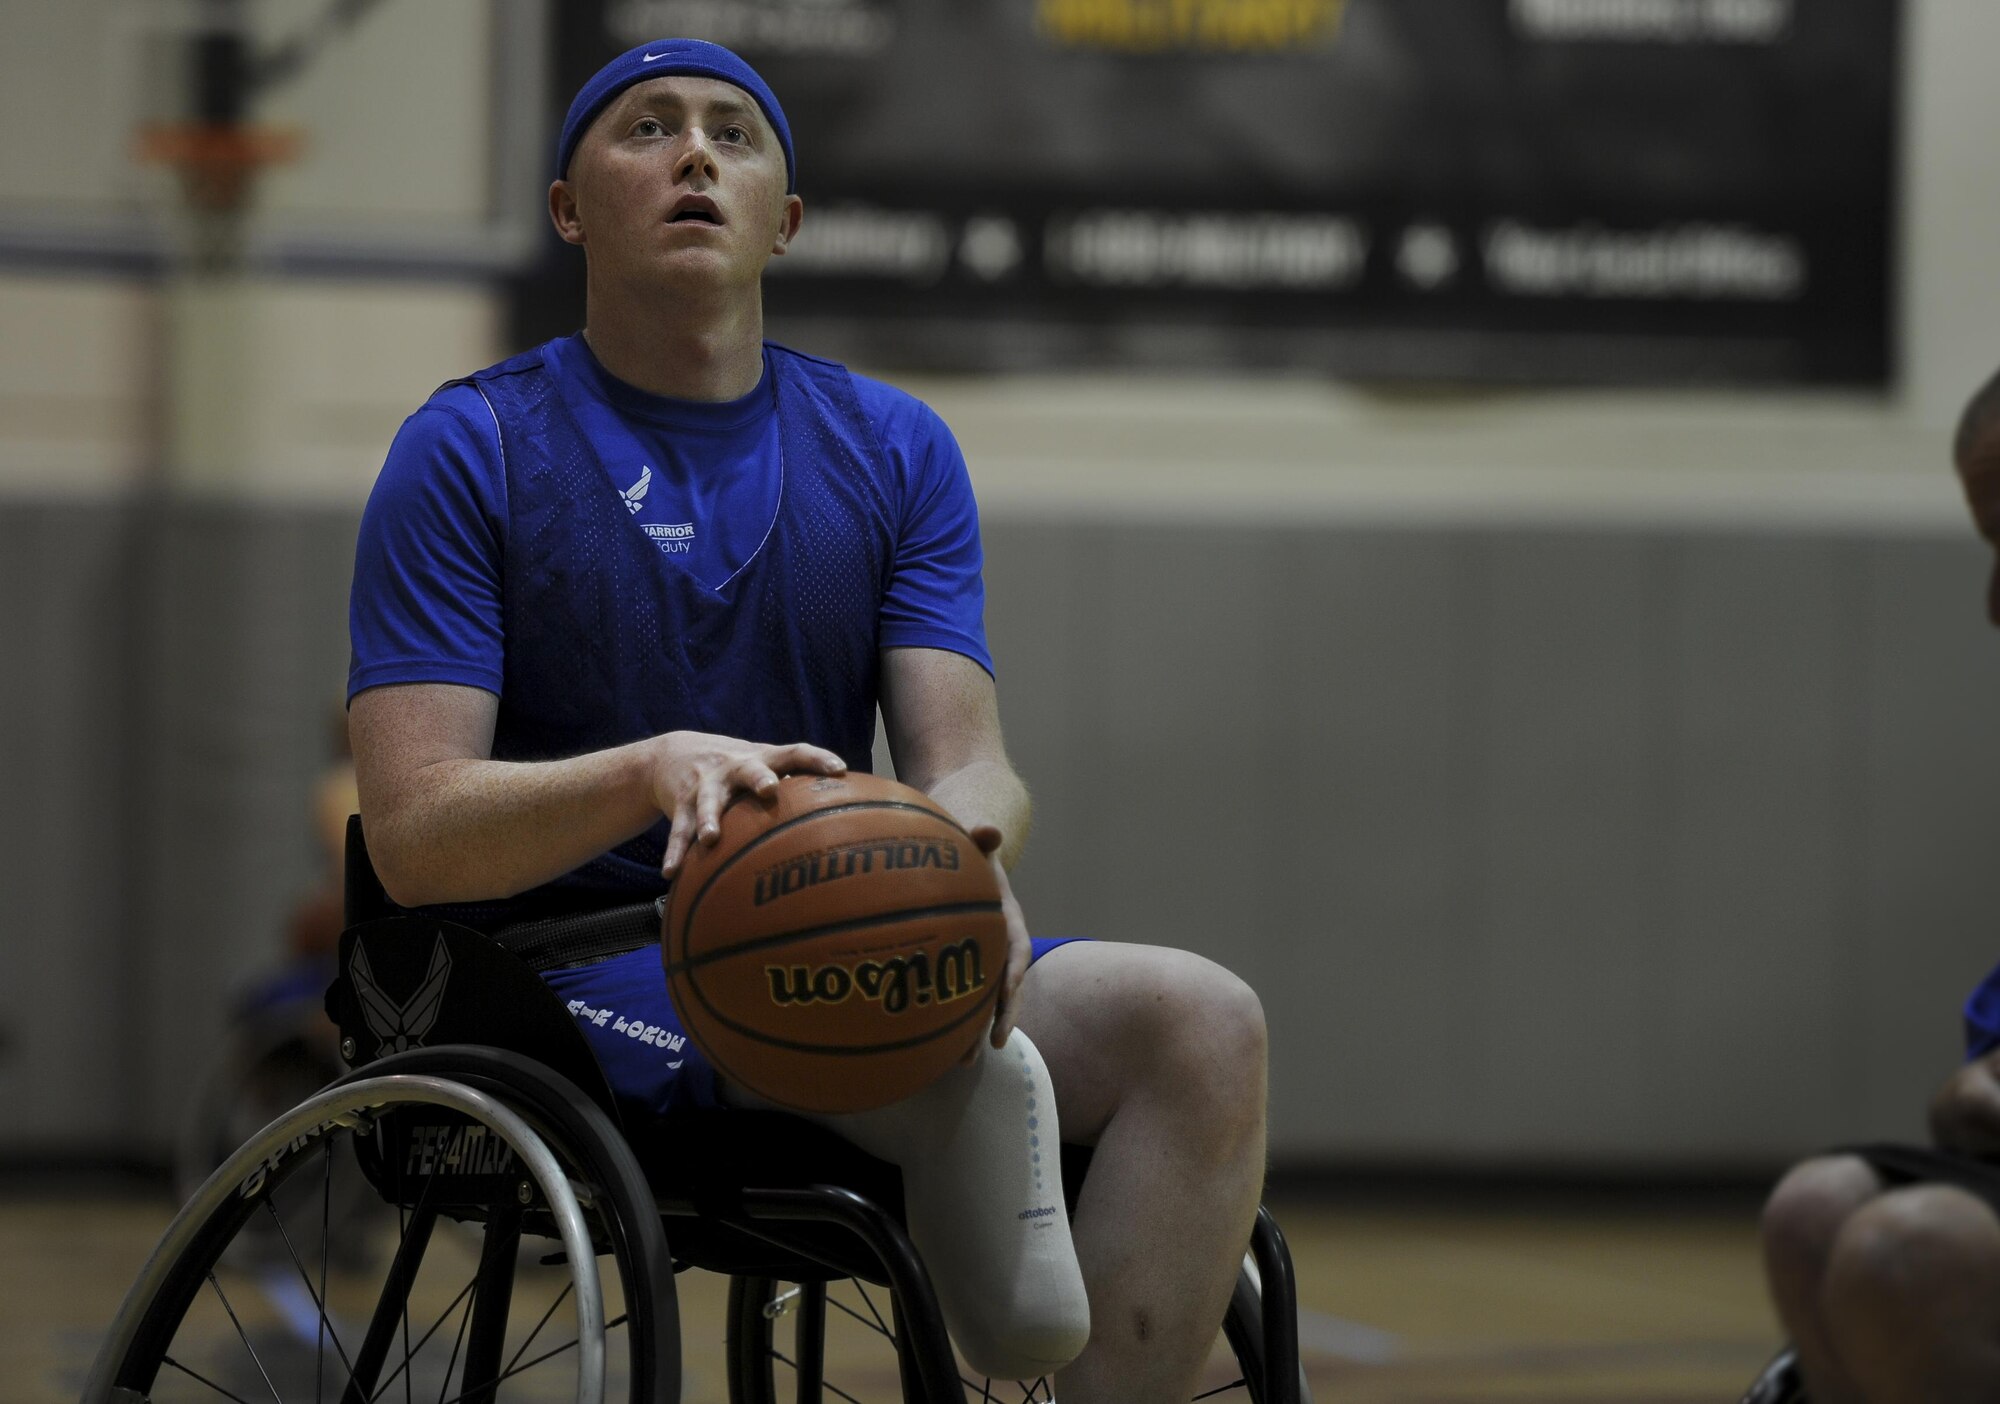 Austin Williamson, a shooting guard with the Air Force wheelchair basketball team, prepares to shoot a free throw during practice at Hurlburt Field, Fla., April 24, 2017. The team is composed of wounded warriors who compete against other Department of Defense teams. (U.S. Air Force photo by Airman 1st Class Dennis Spain)